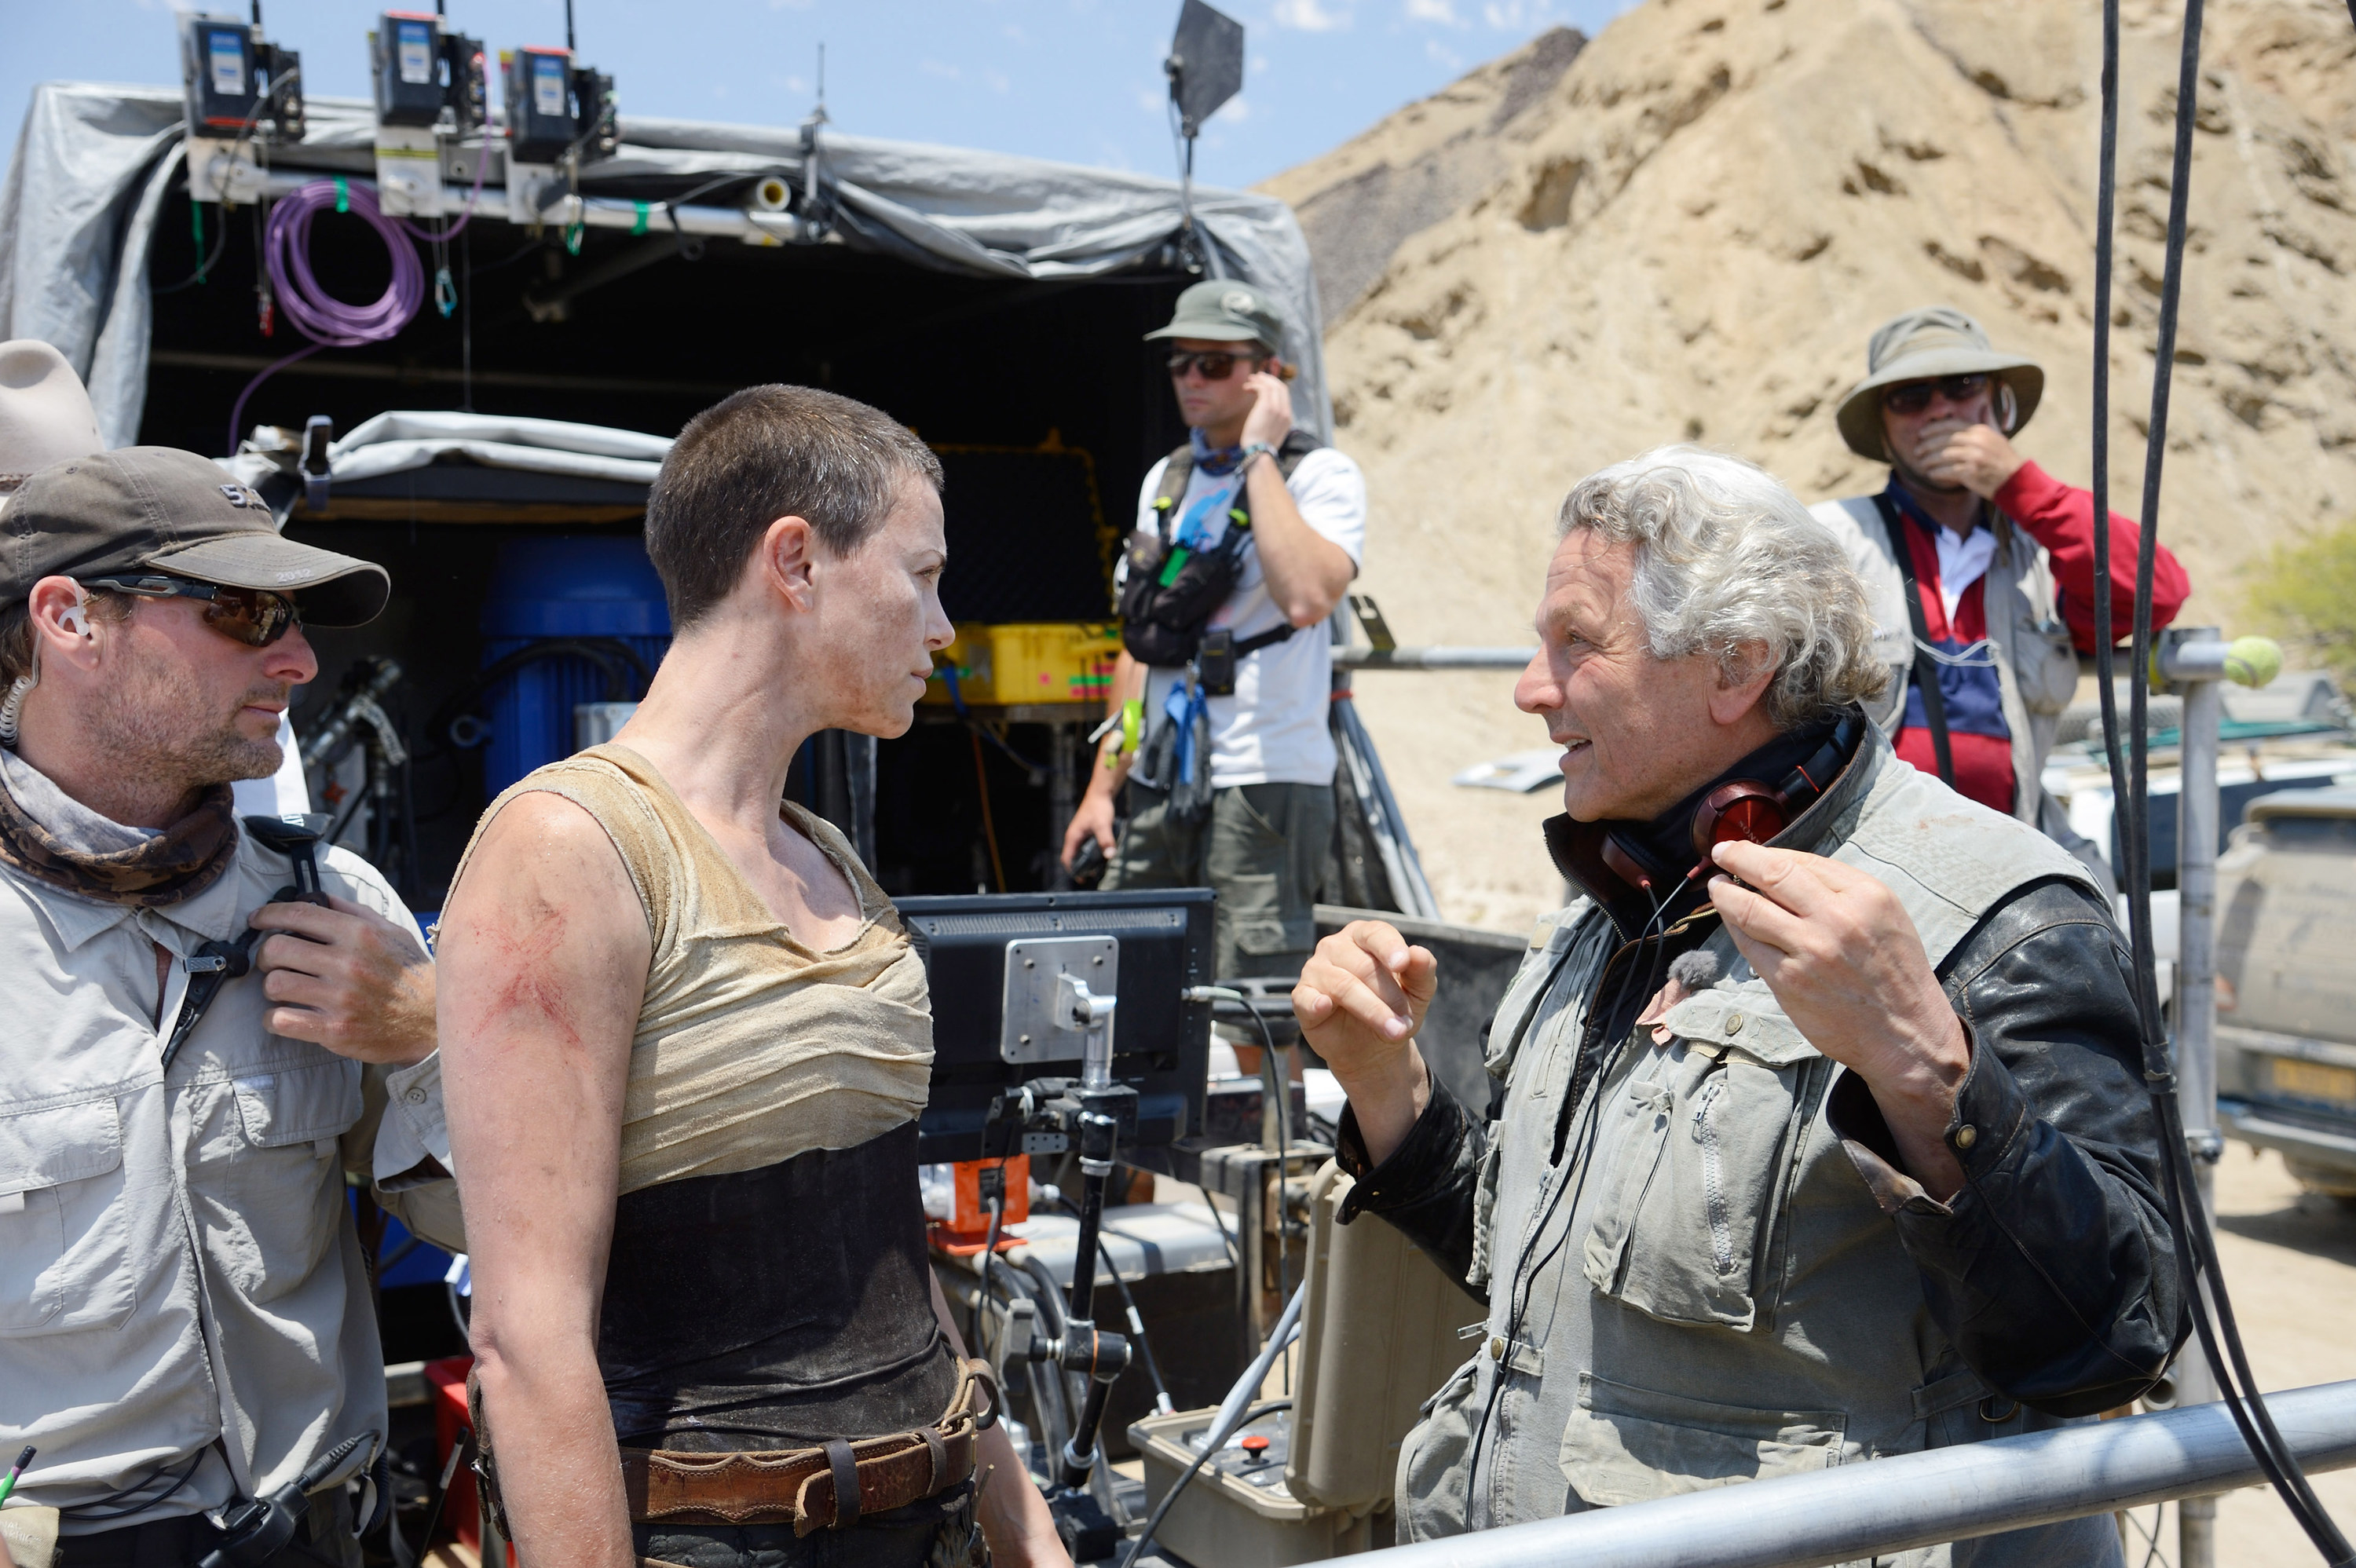 Charlize Theron chatting with director George Miller on set